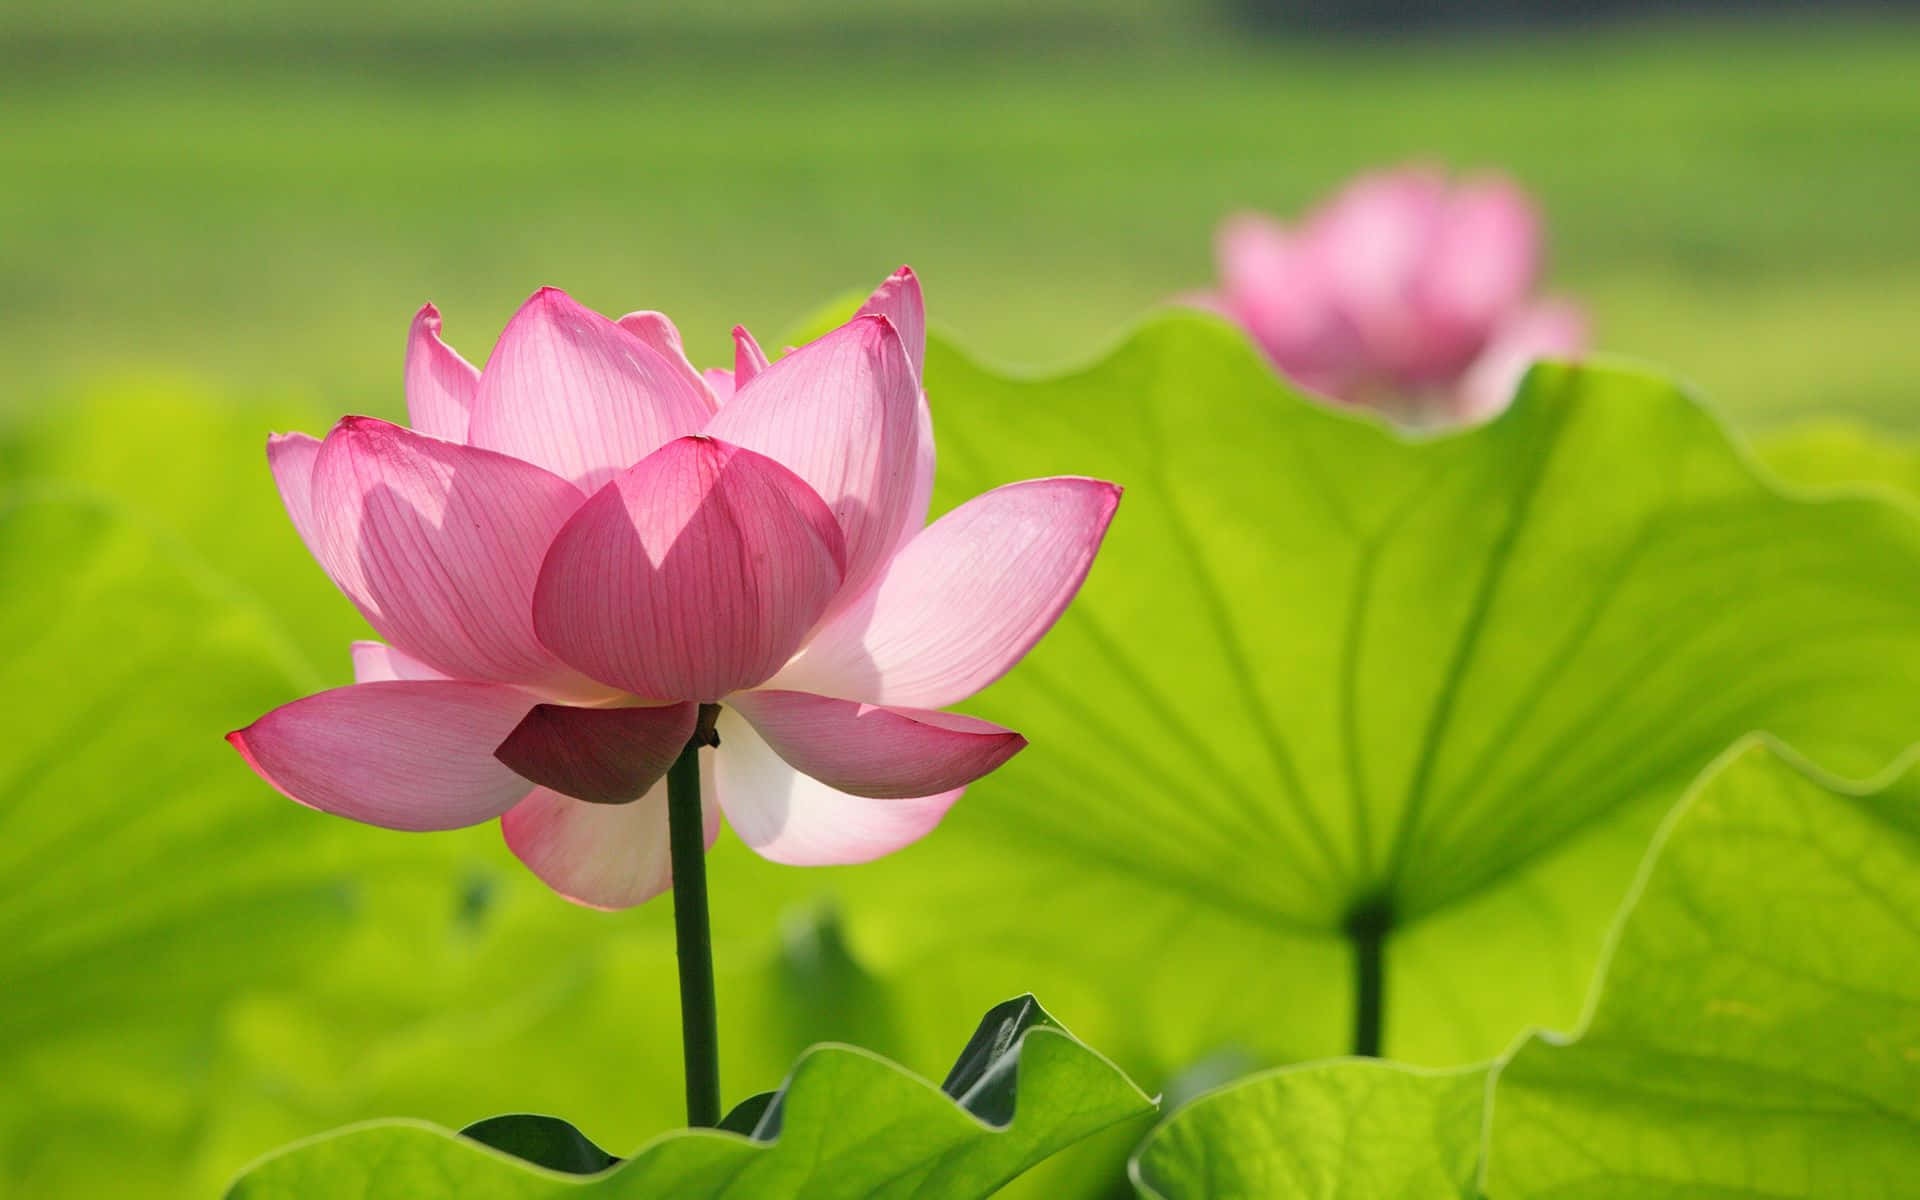 A Lotus Flower With Water Droplets At its Petals